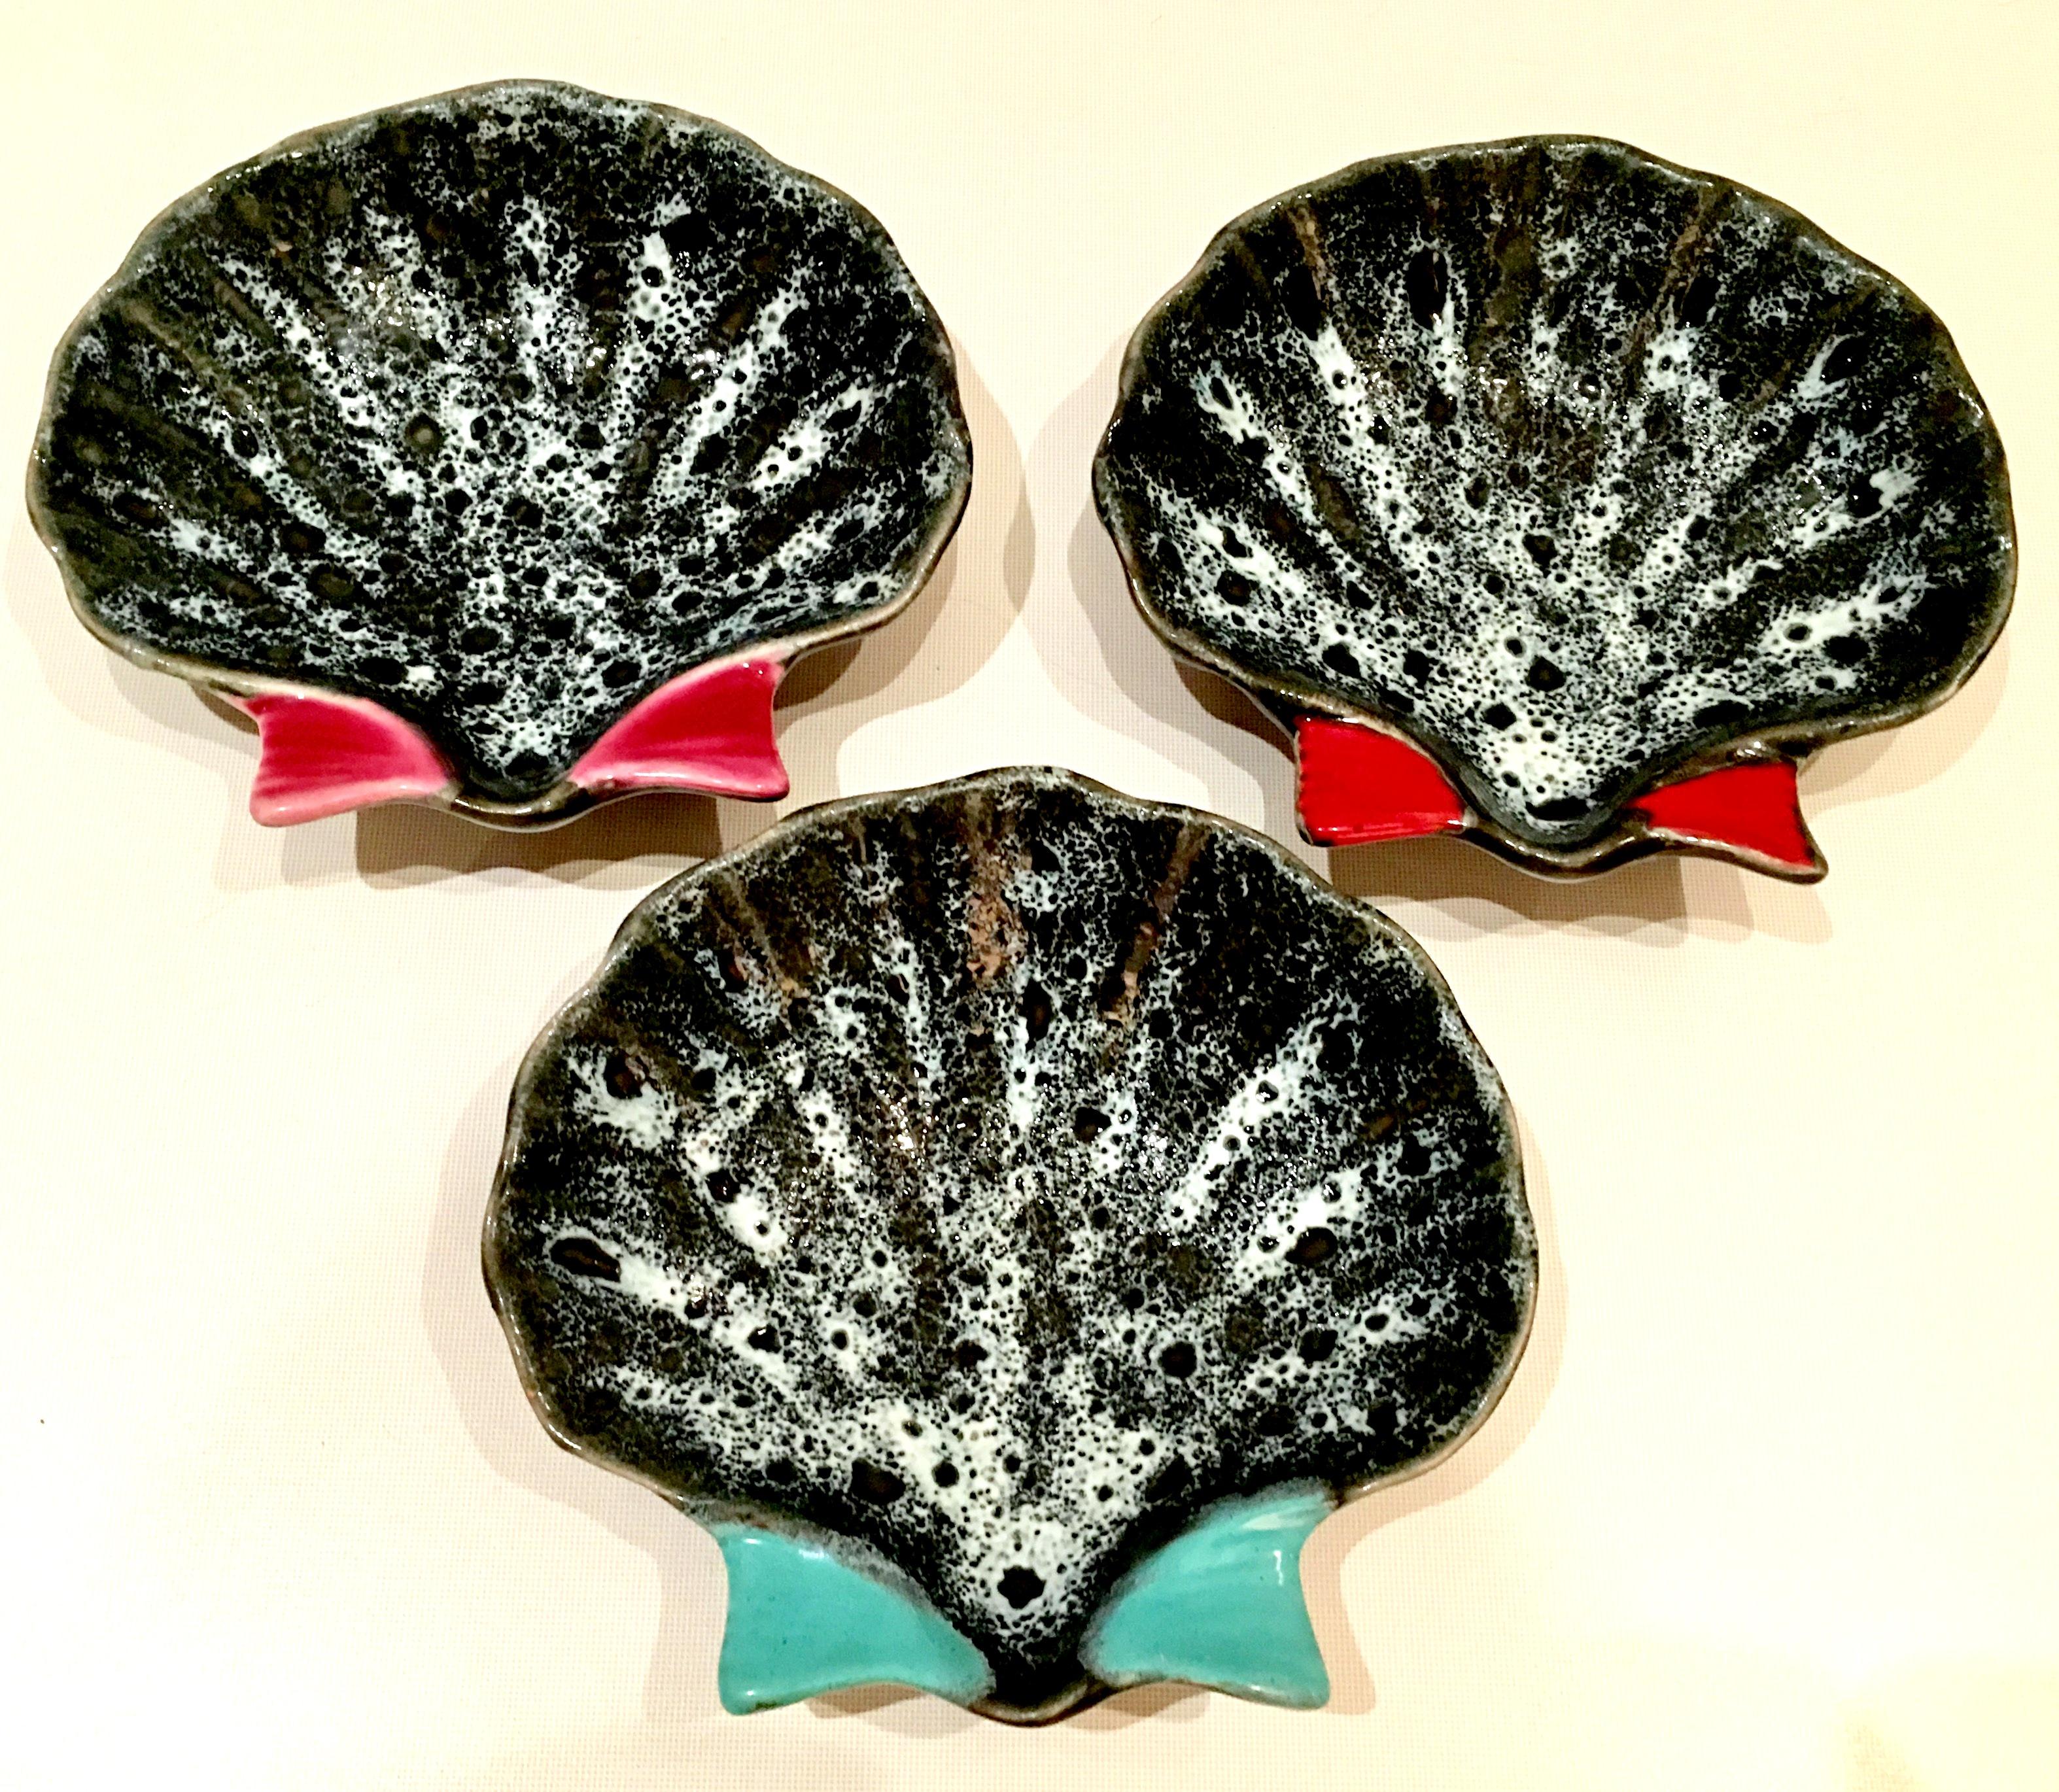 Mid-Century French Hand Painted Pottery Oyster Dish Set Of Three Pieces.  Each dish has a different fin color, turquoise, pink and red. These South Of France ceramic glaze and hand painted oyster dishes are each signed on the underside by, Luc